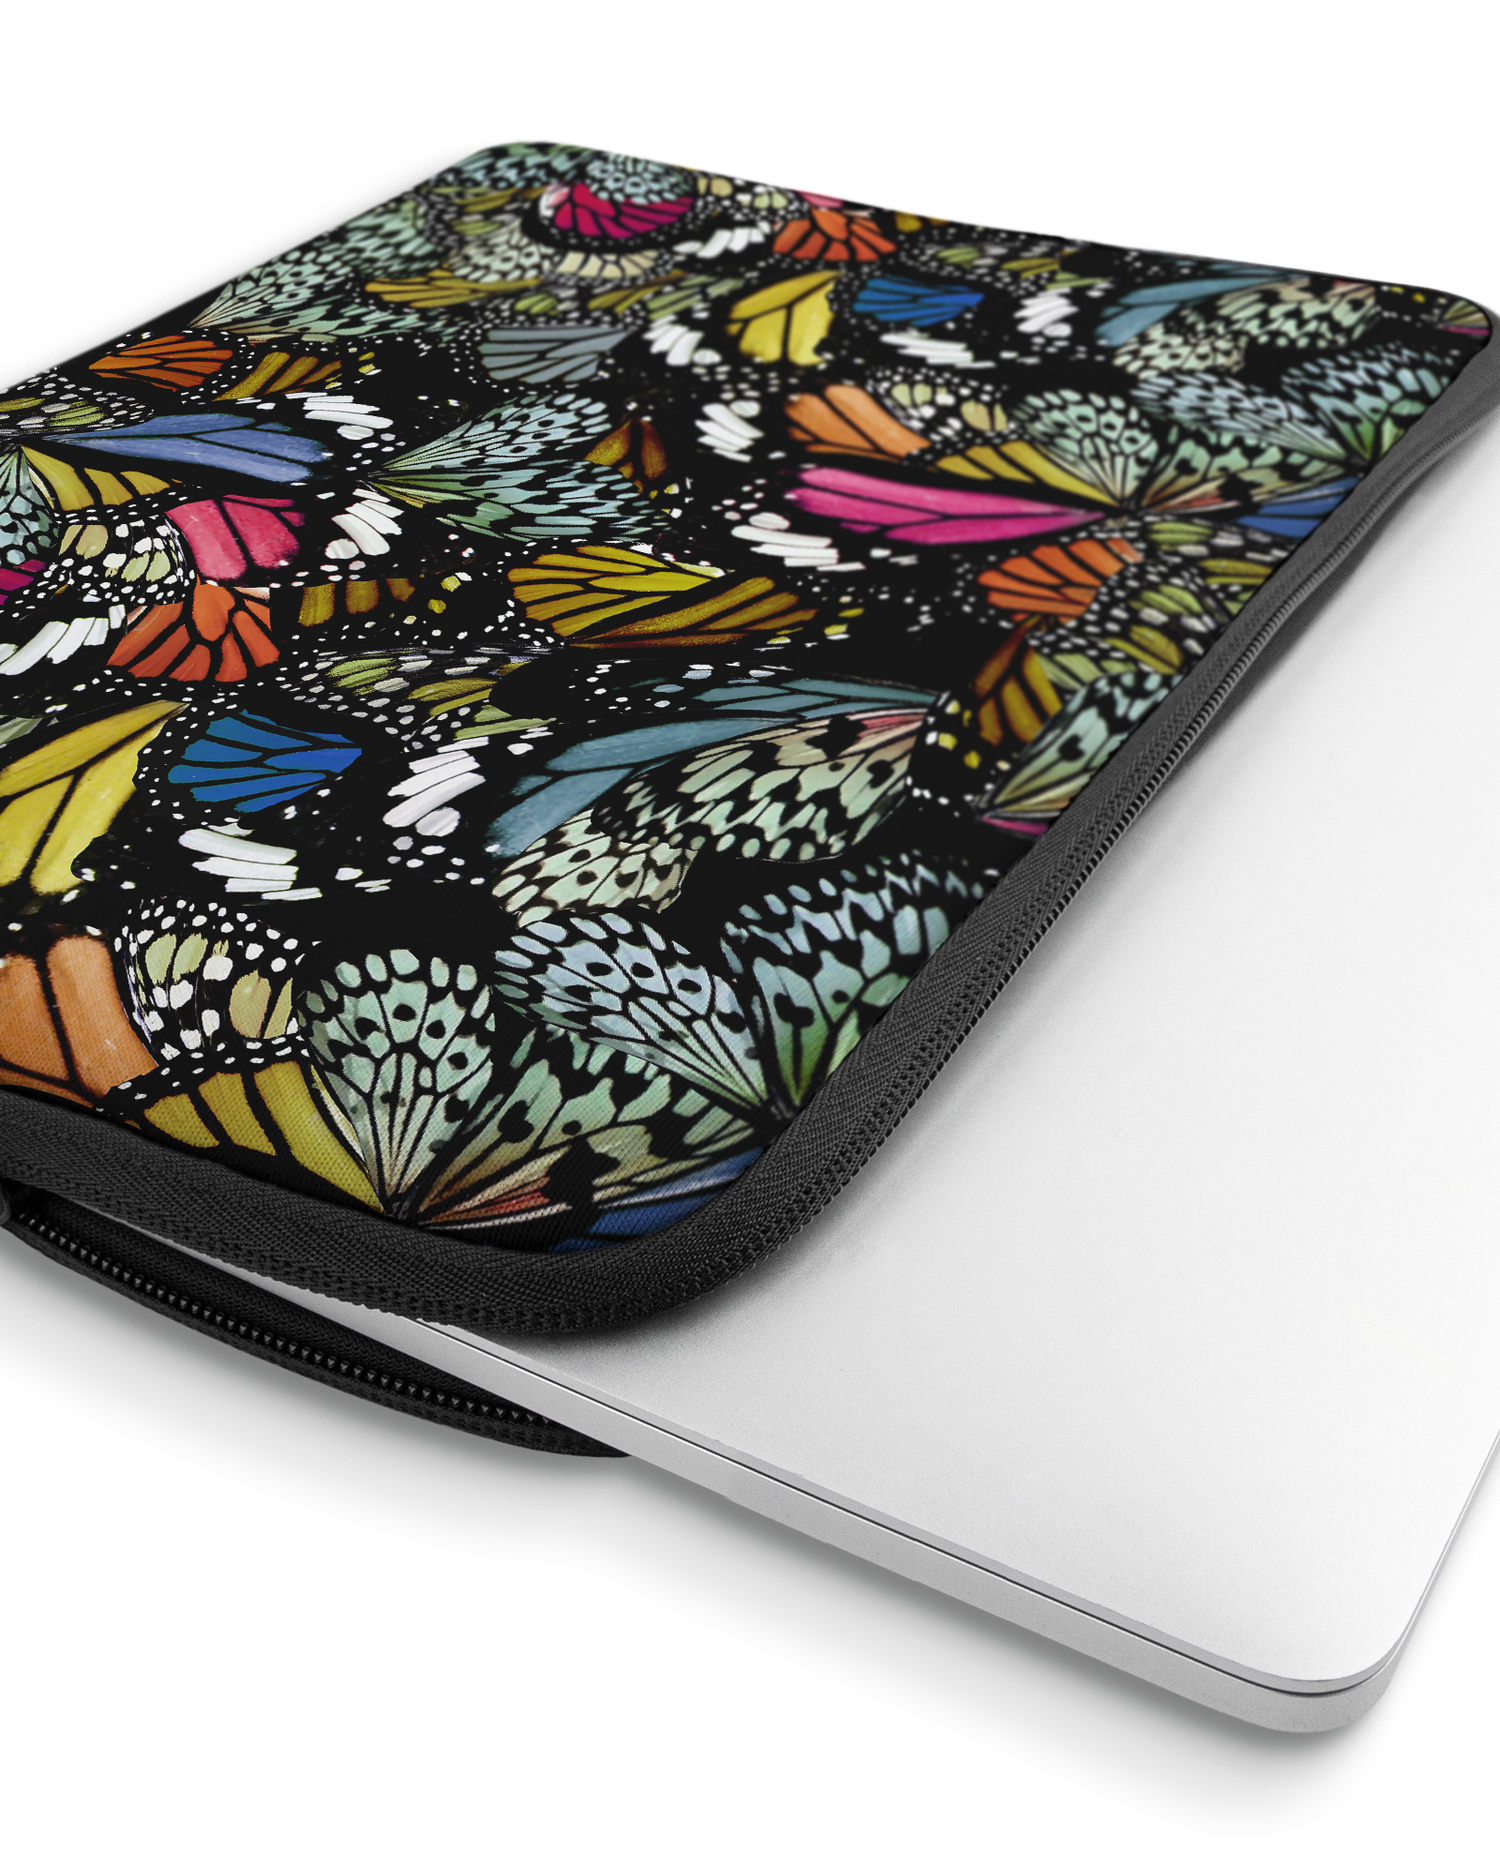 Psychedelic Butterflies Laptop Case 16 inch with device inside